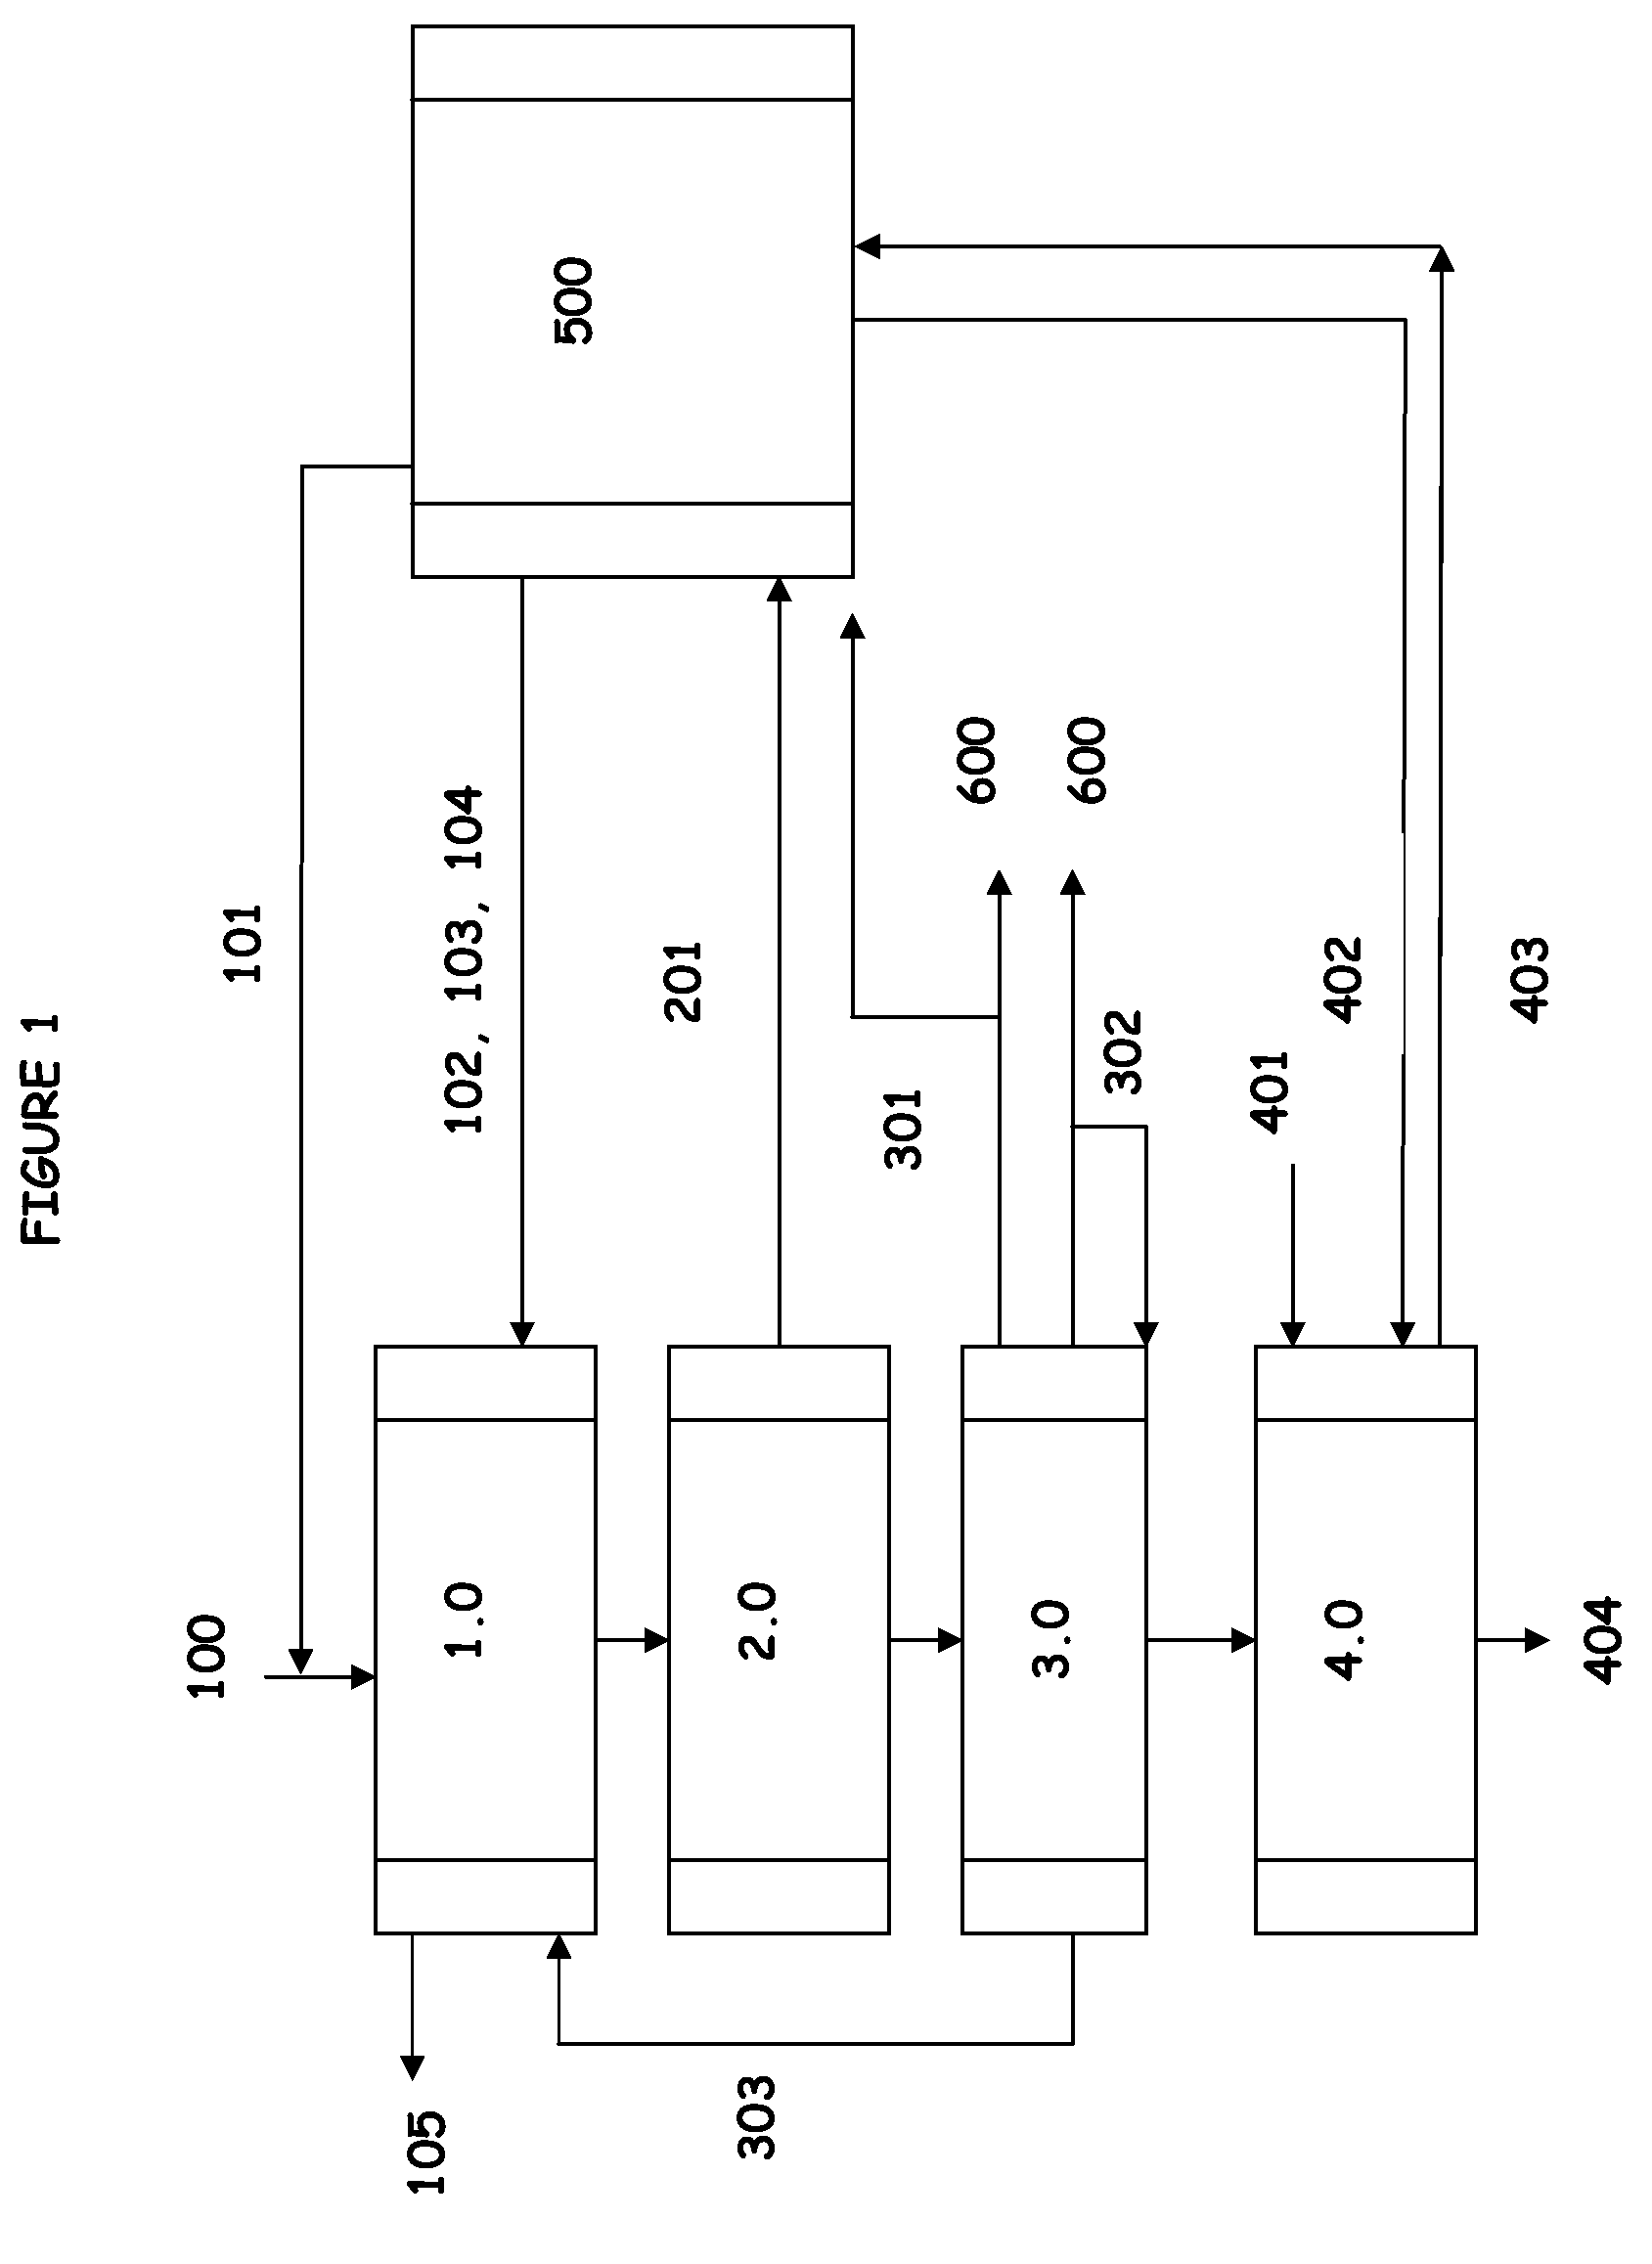 Production of levulinic acid and levulinate esters from biomass